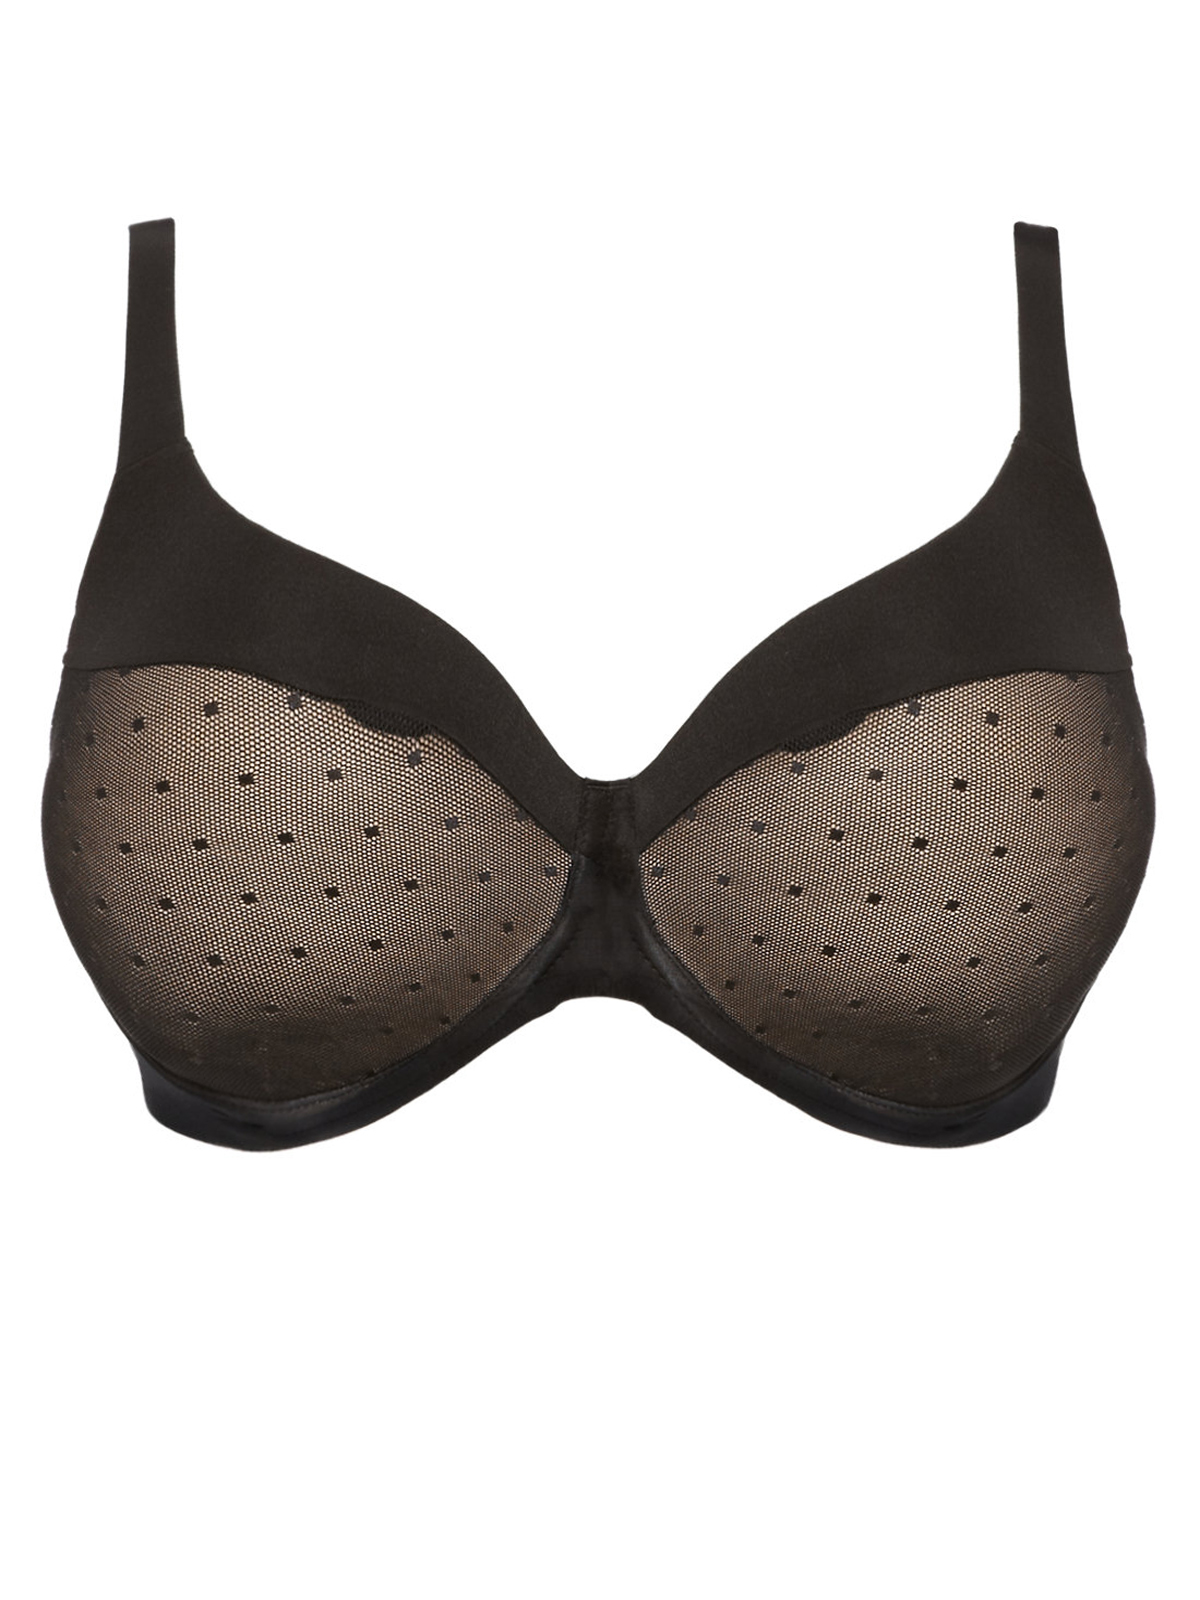 Marks and Spencer - - M&5 ASSORTED Plain, Longline & Lace Bras - Size ...